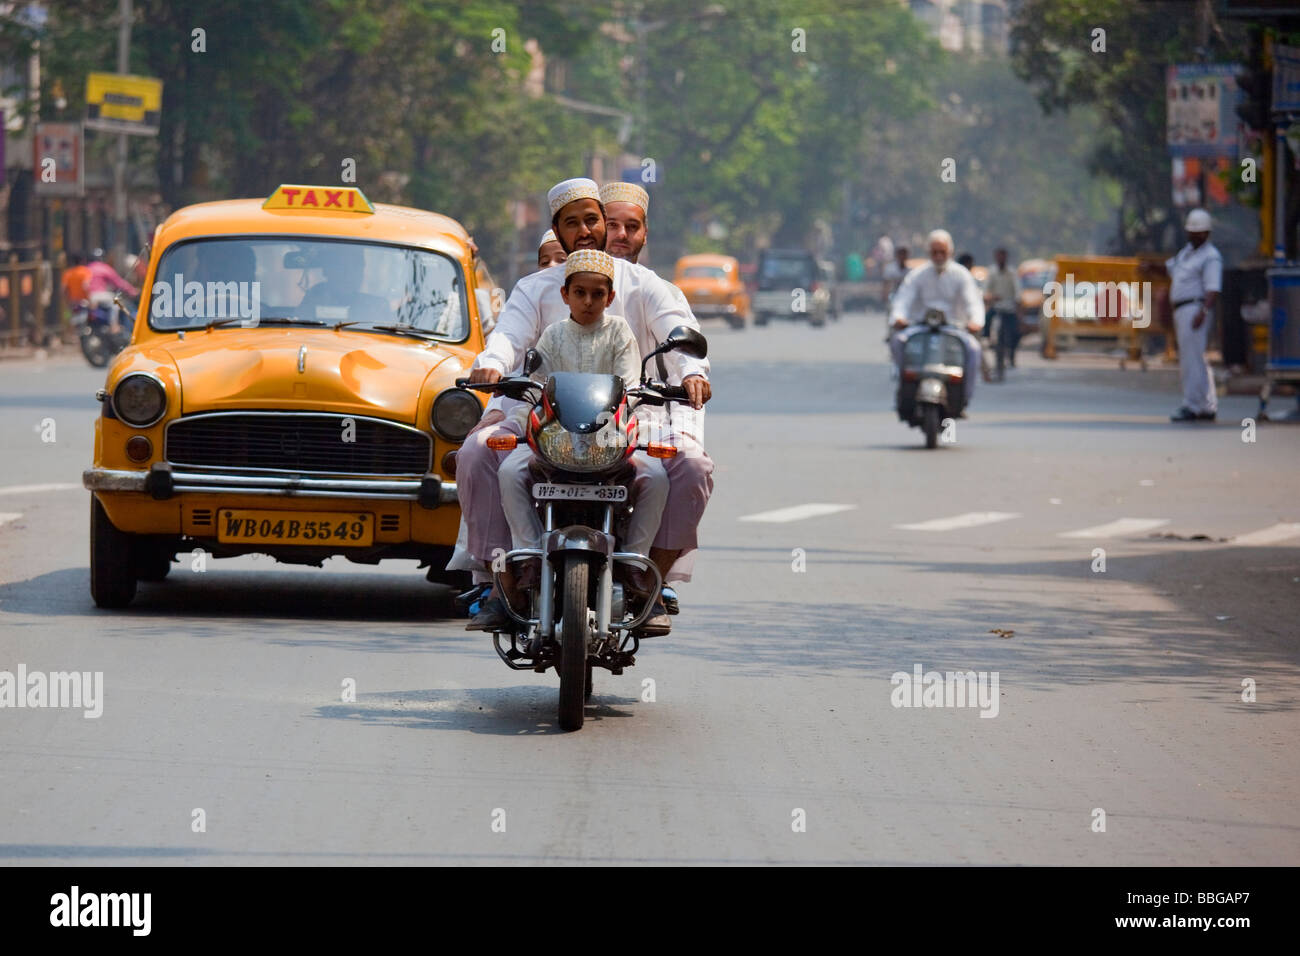 Muslim Men and Boys on a Motorcycle in Calcutta India Stock Photo